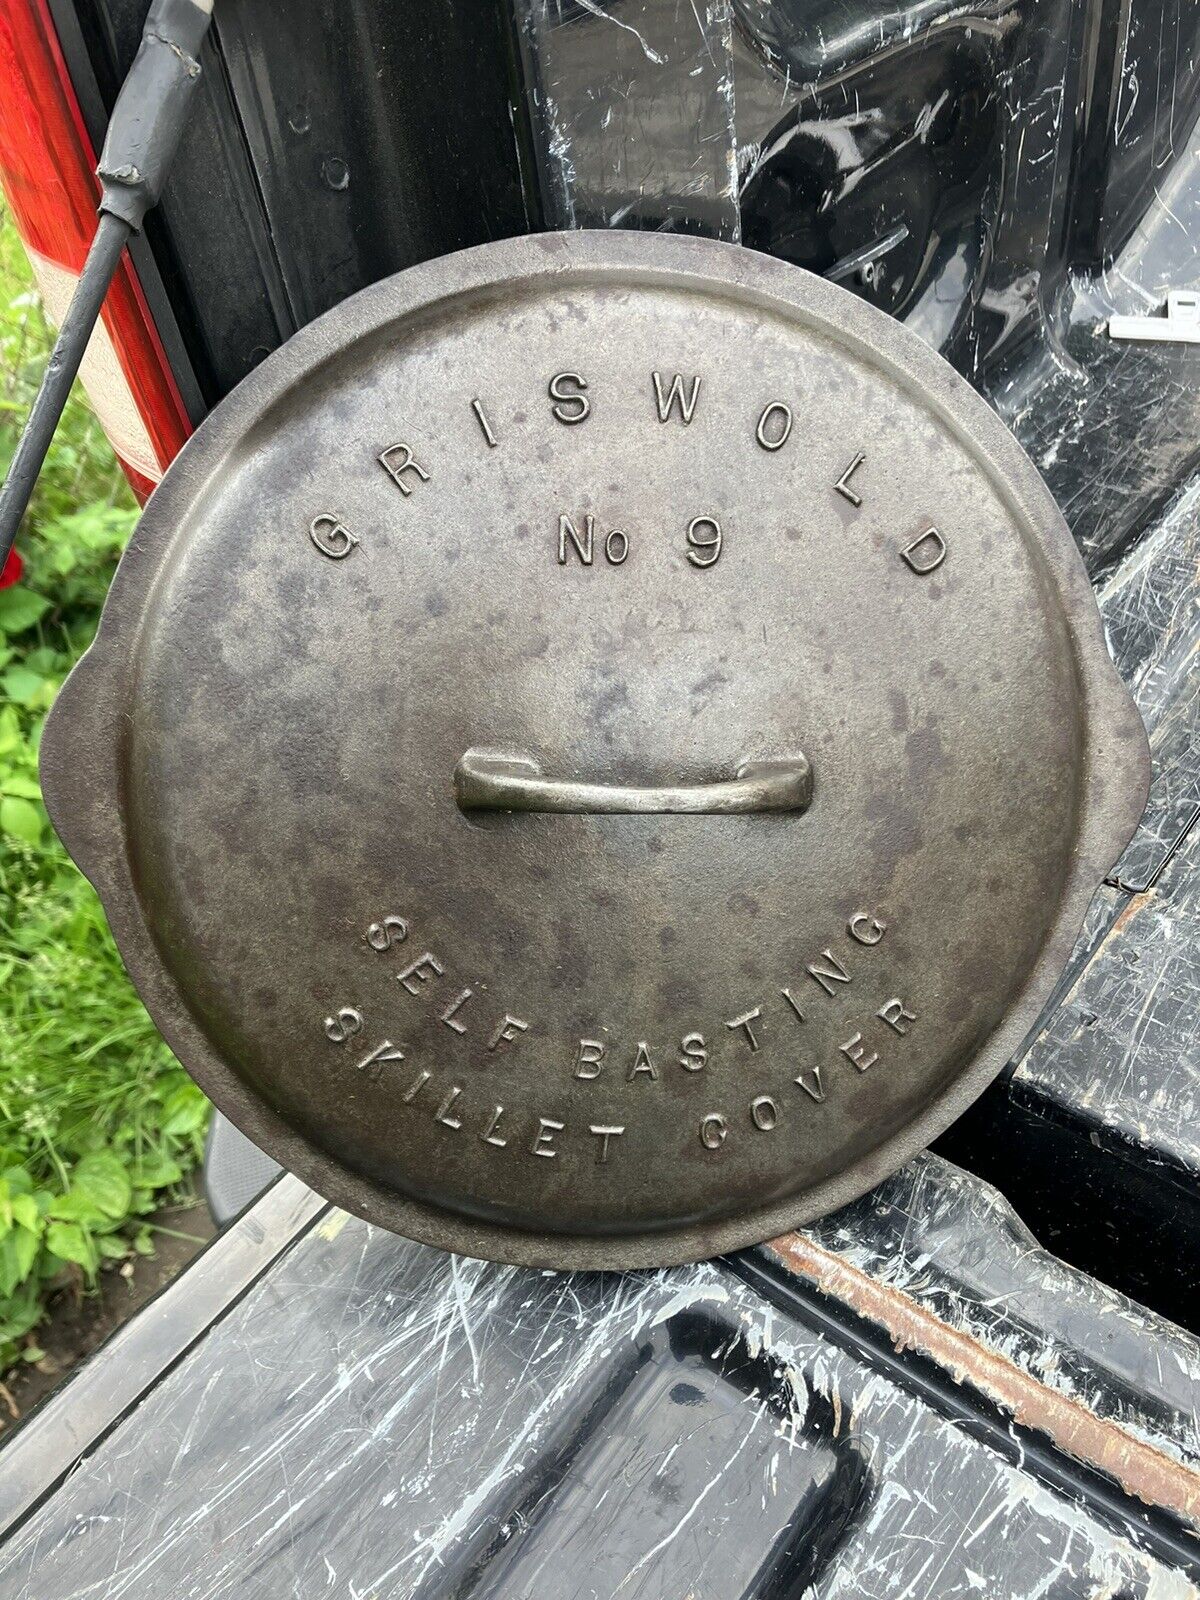 CAST IRON GRISWOLD #9 SELF BASTING SKILLET COVER P/NO 469 WITH LARGE BLOCK LOGO